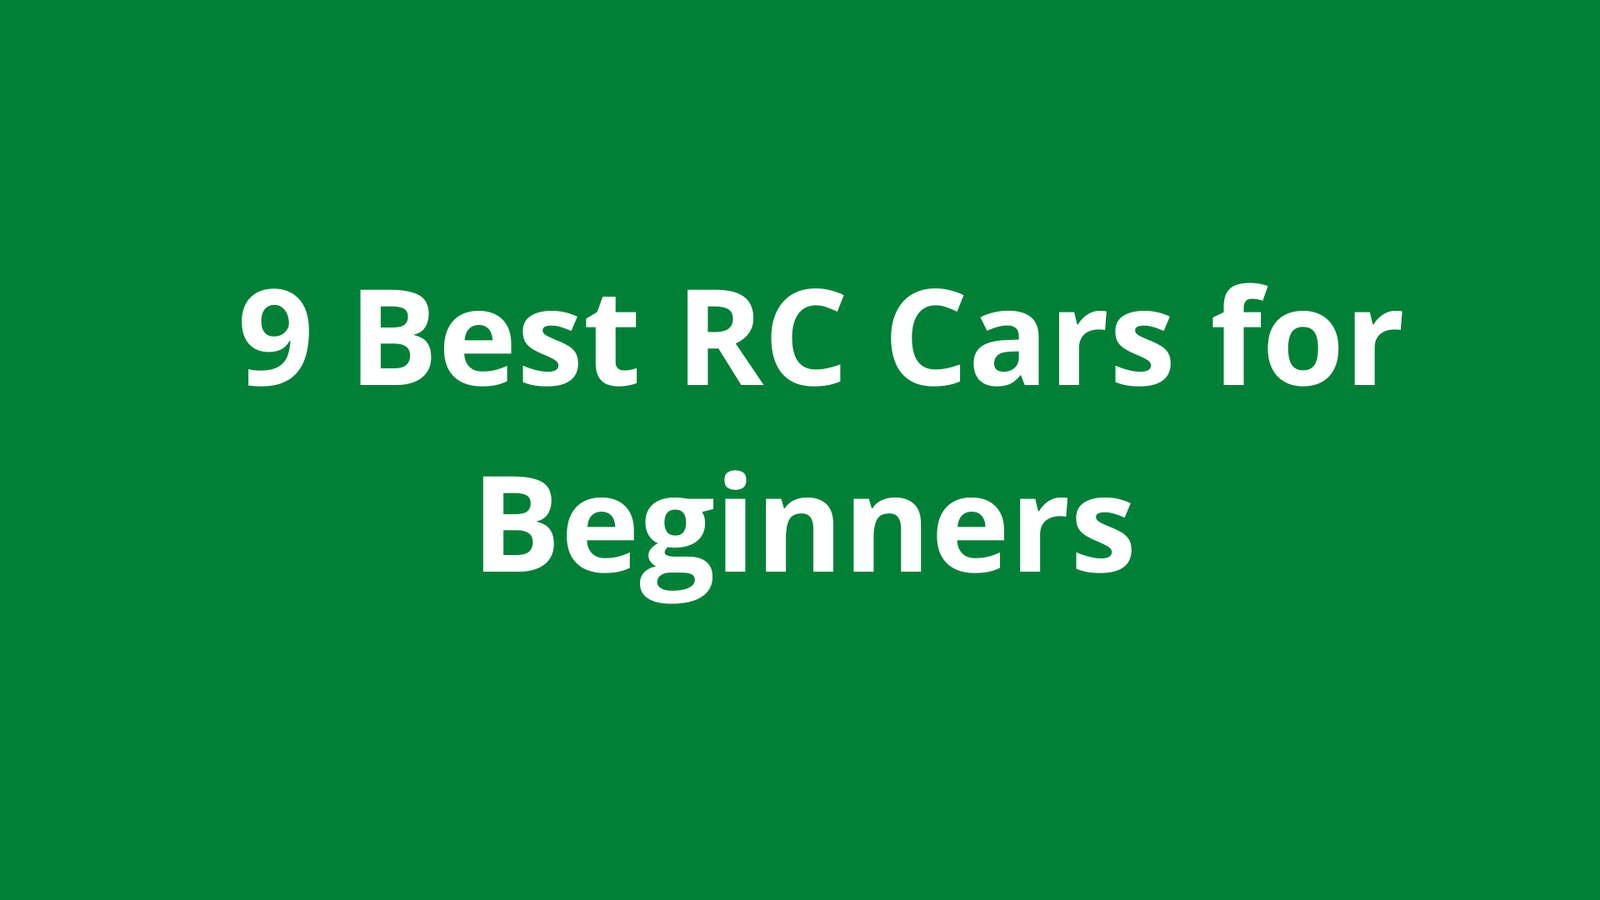 9 Best RC Cars for Beginners